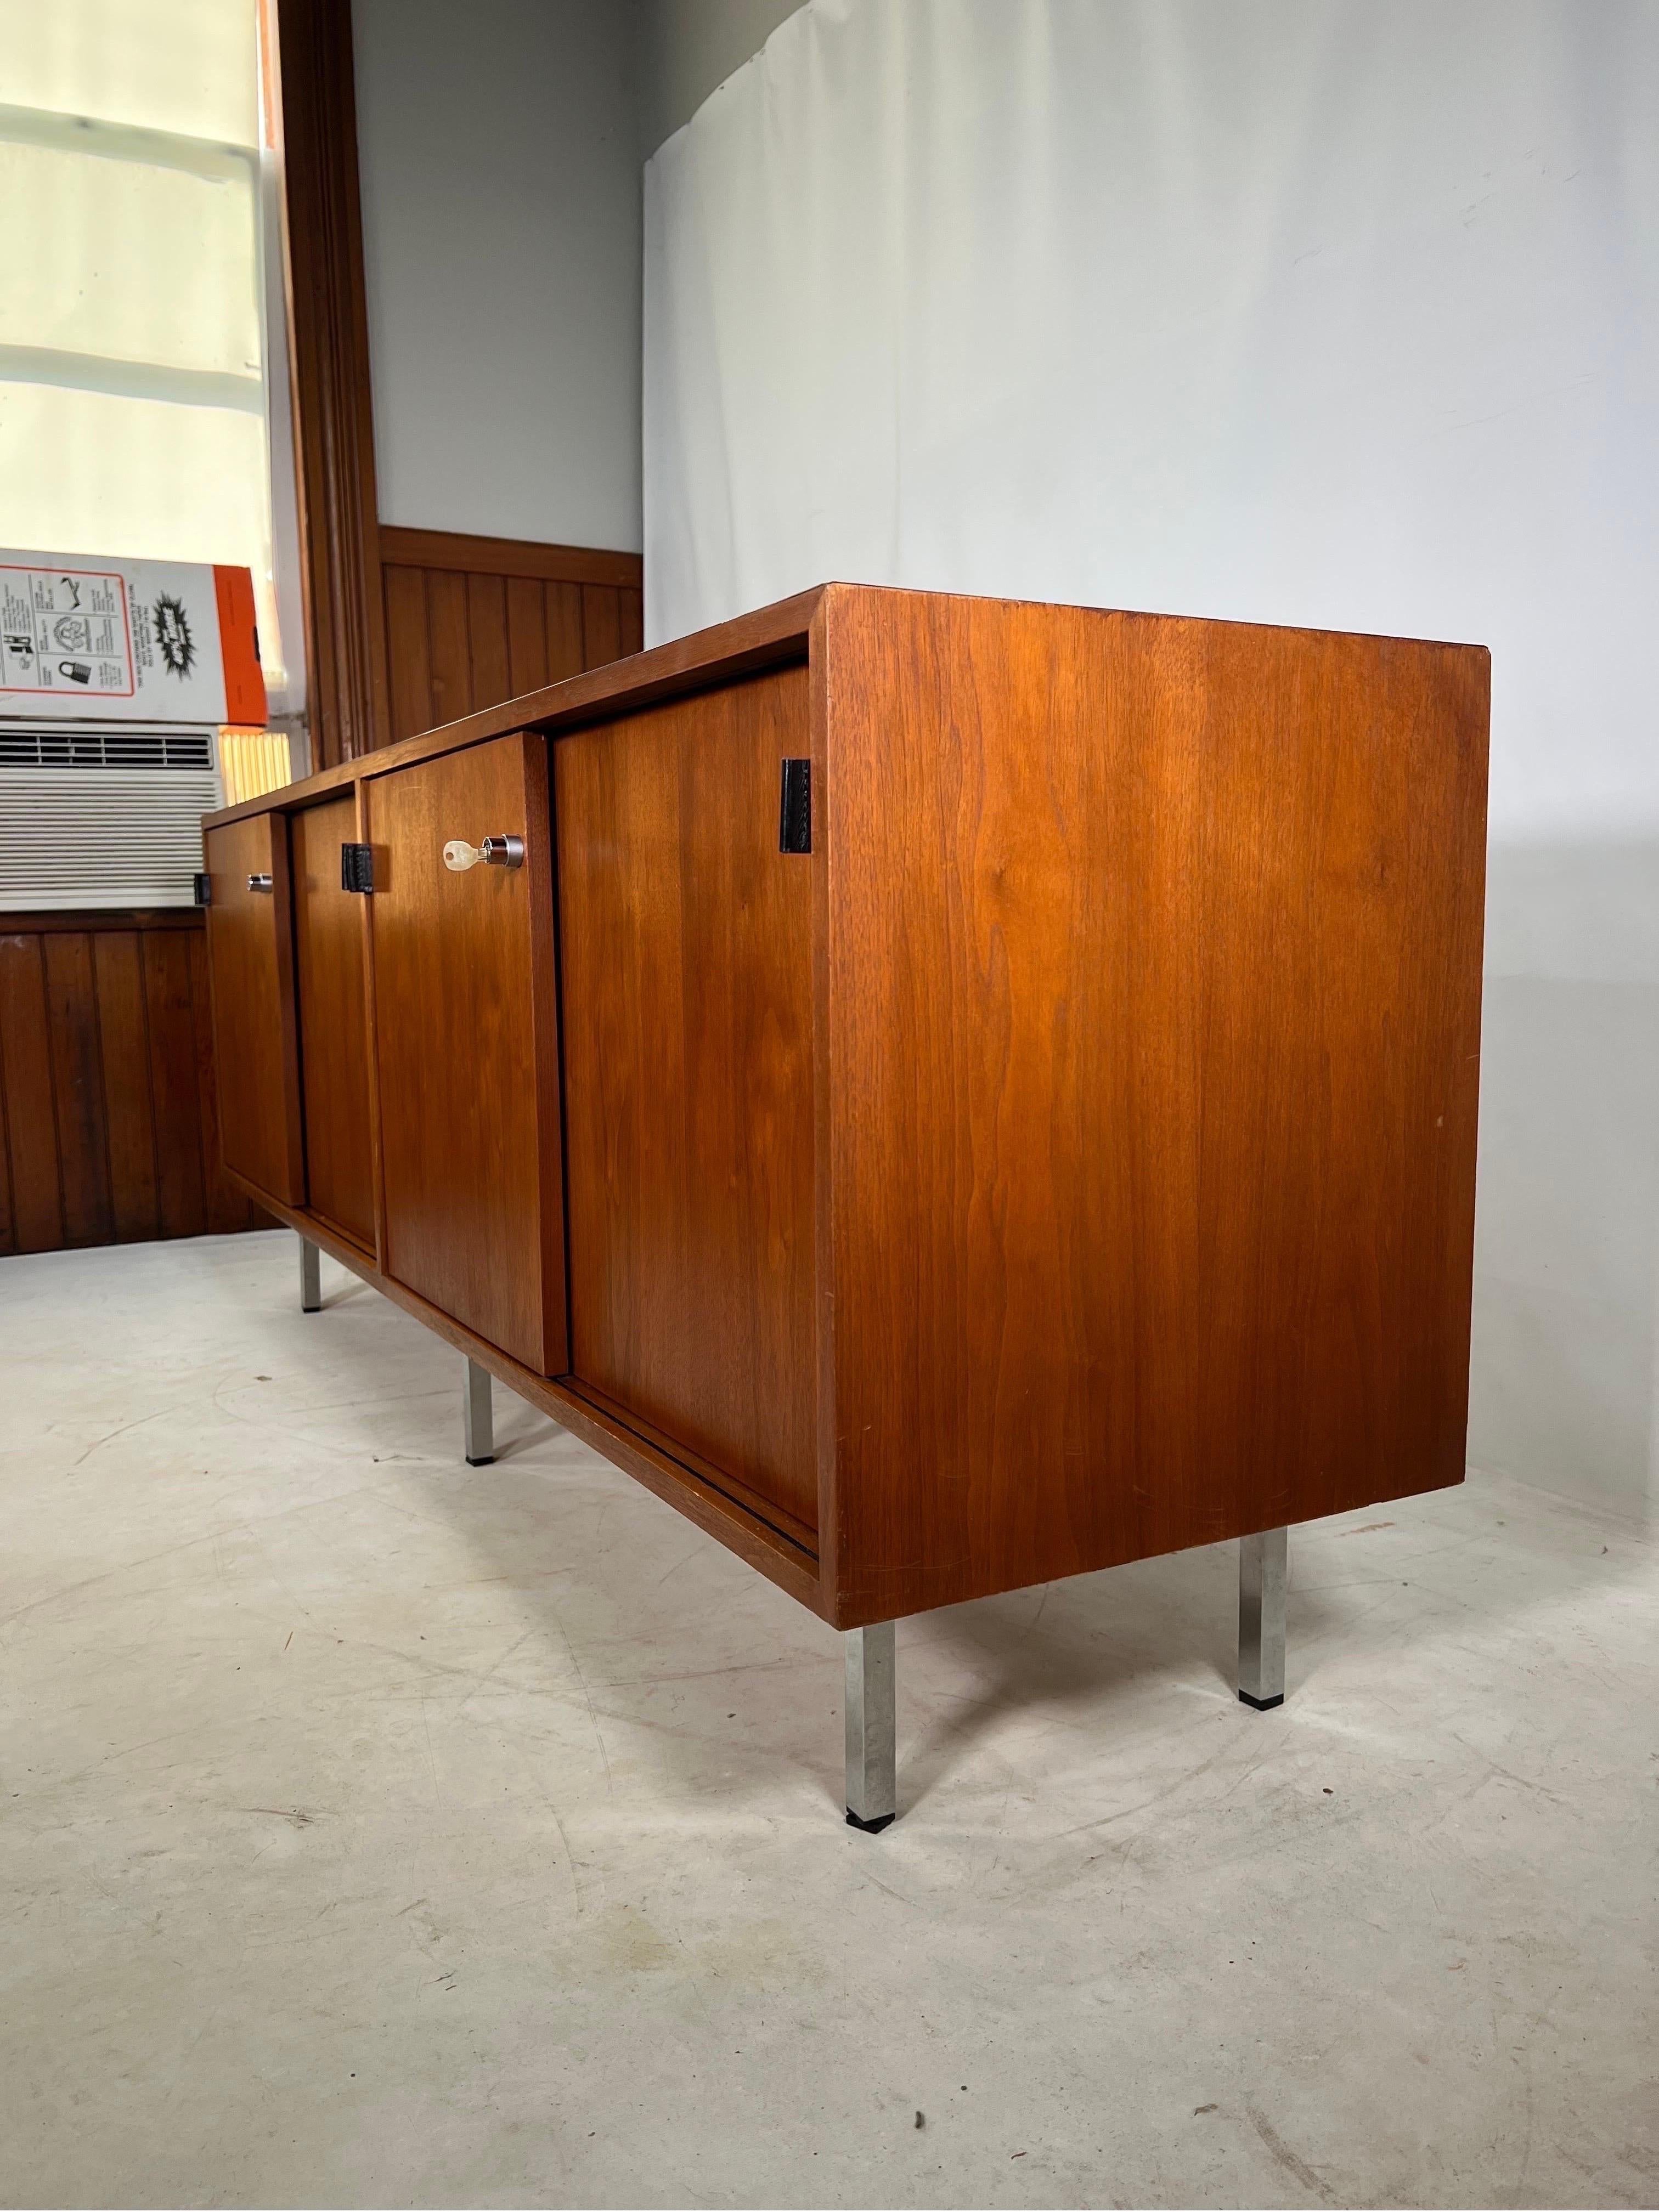 The credenza is constructed of walnut wood front sliding doors, walnut sides, leather strap handles, chrome legs and a laminate top. The credenza still has its original knoll tag and key.